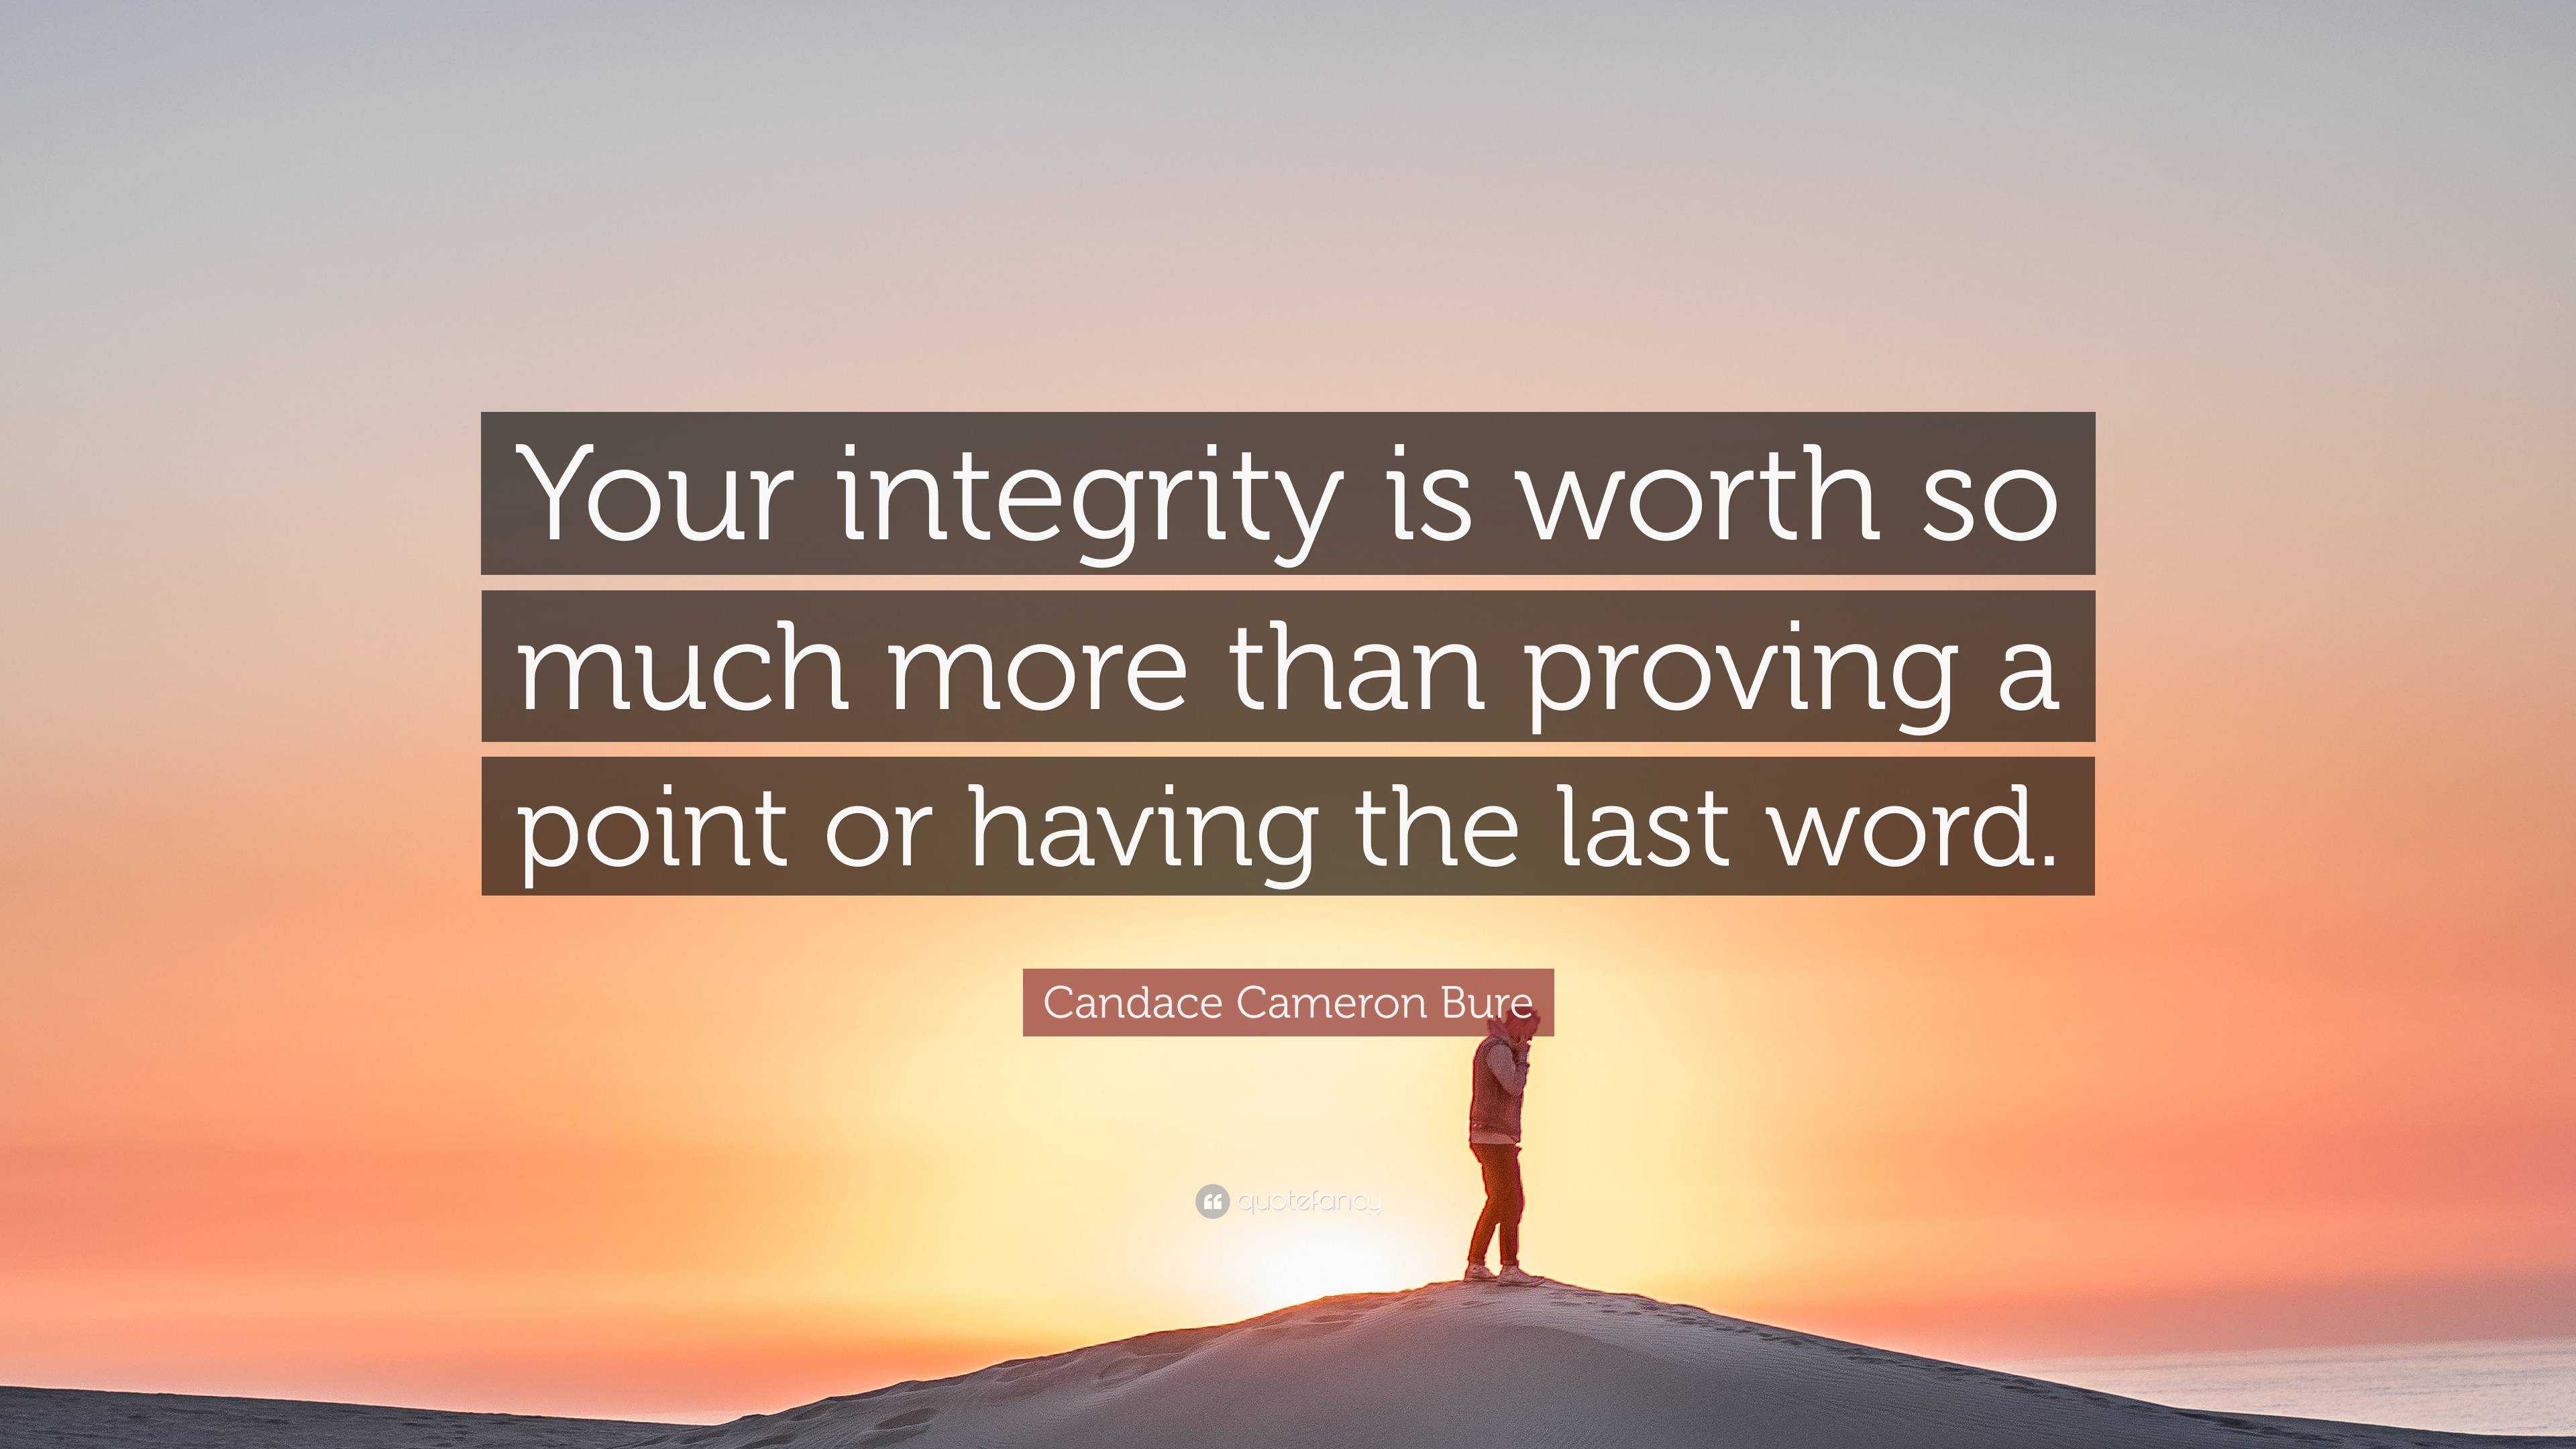 Candace Cameron Bure Quote “Your integrity is worth so